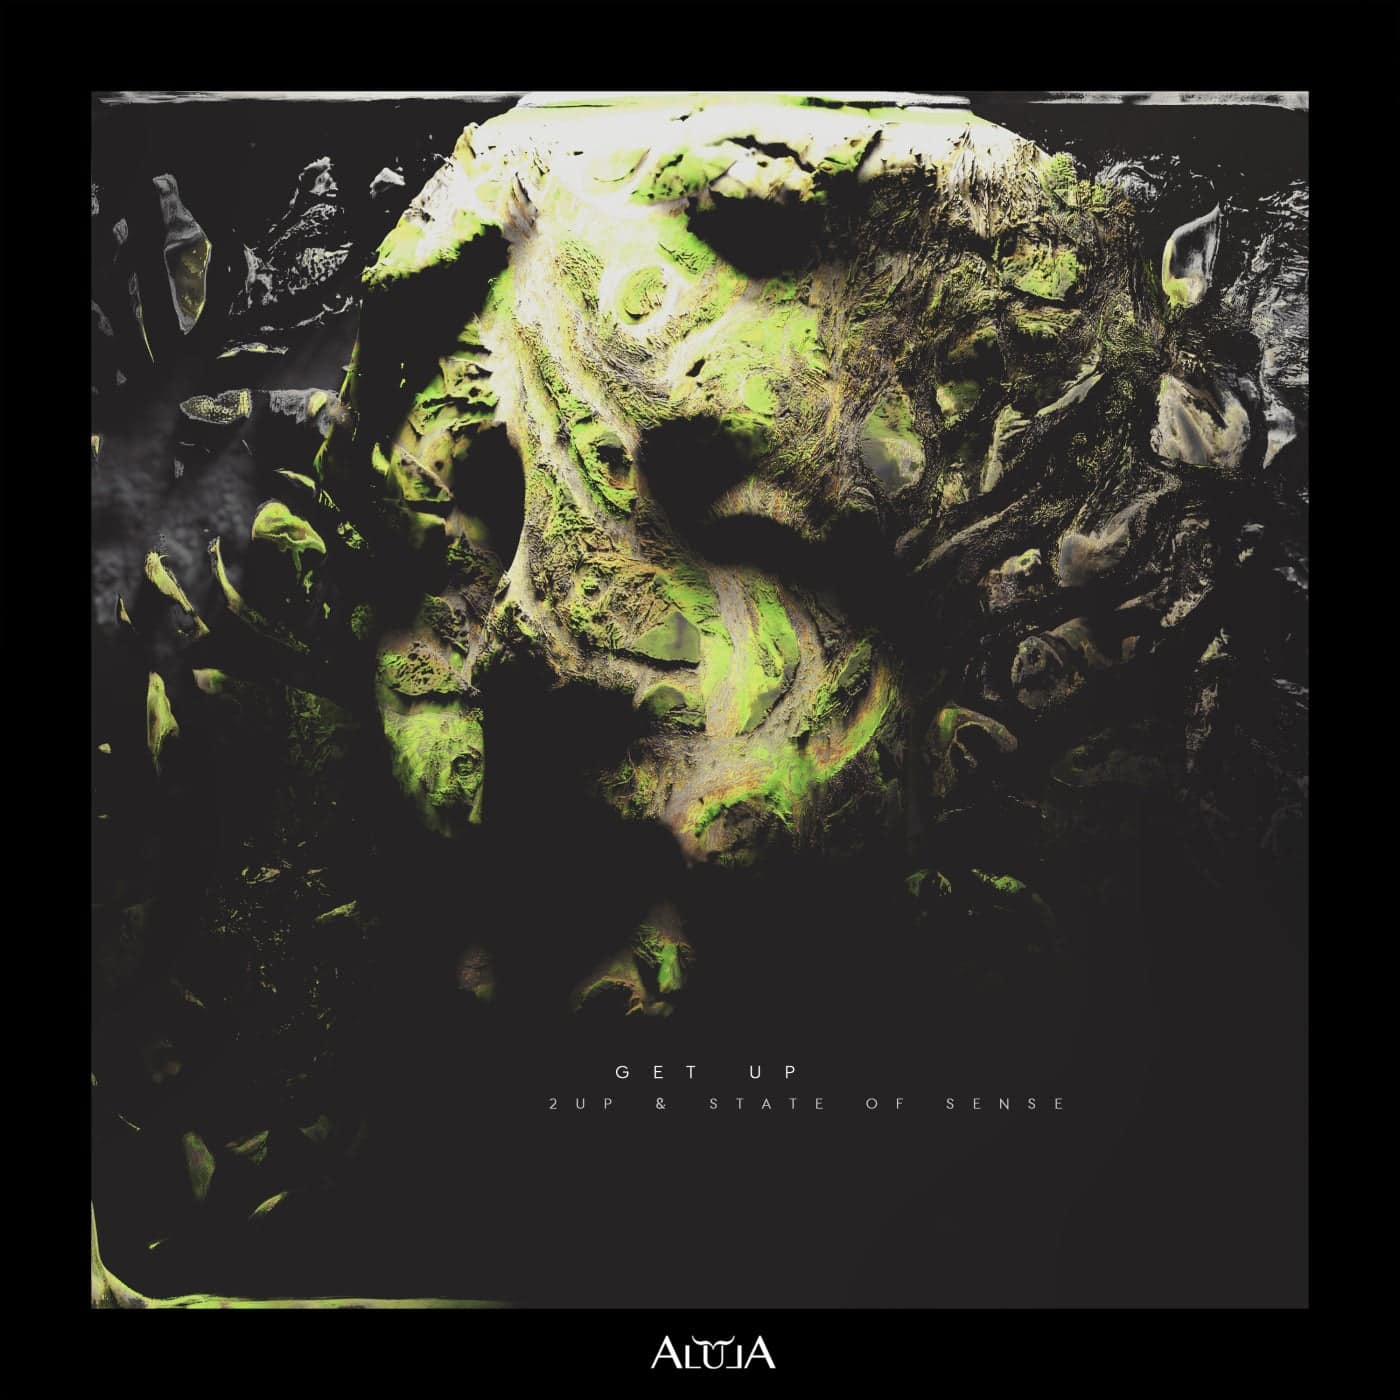 image cover: 2up, State of sense - Get Up / ALULA161